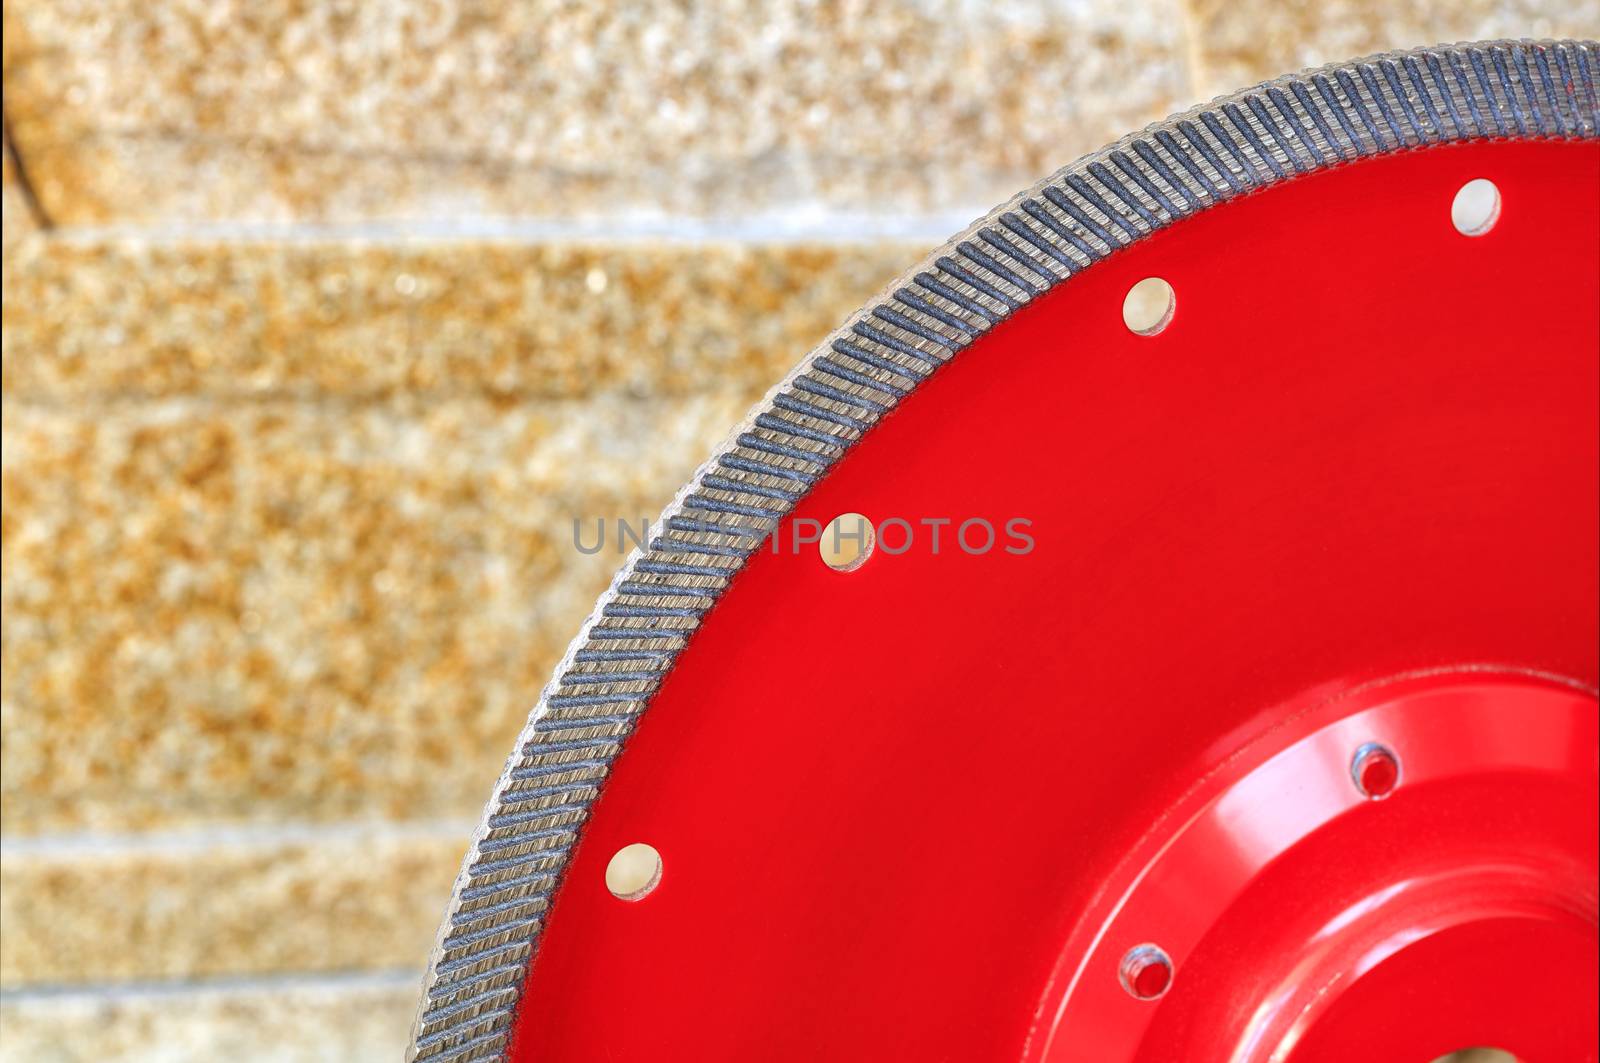 A diamond red cutting segment against a golden sandstone wall in close-up in bright daylight.